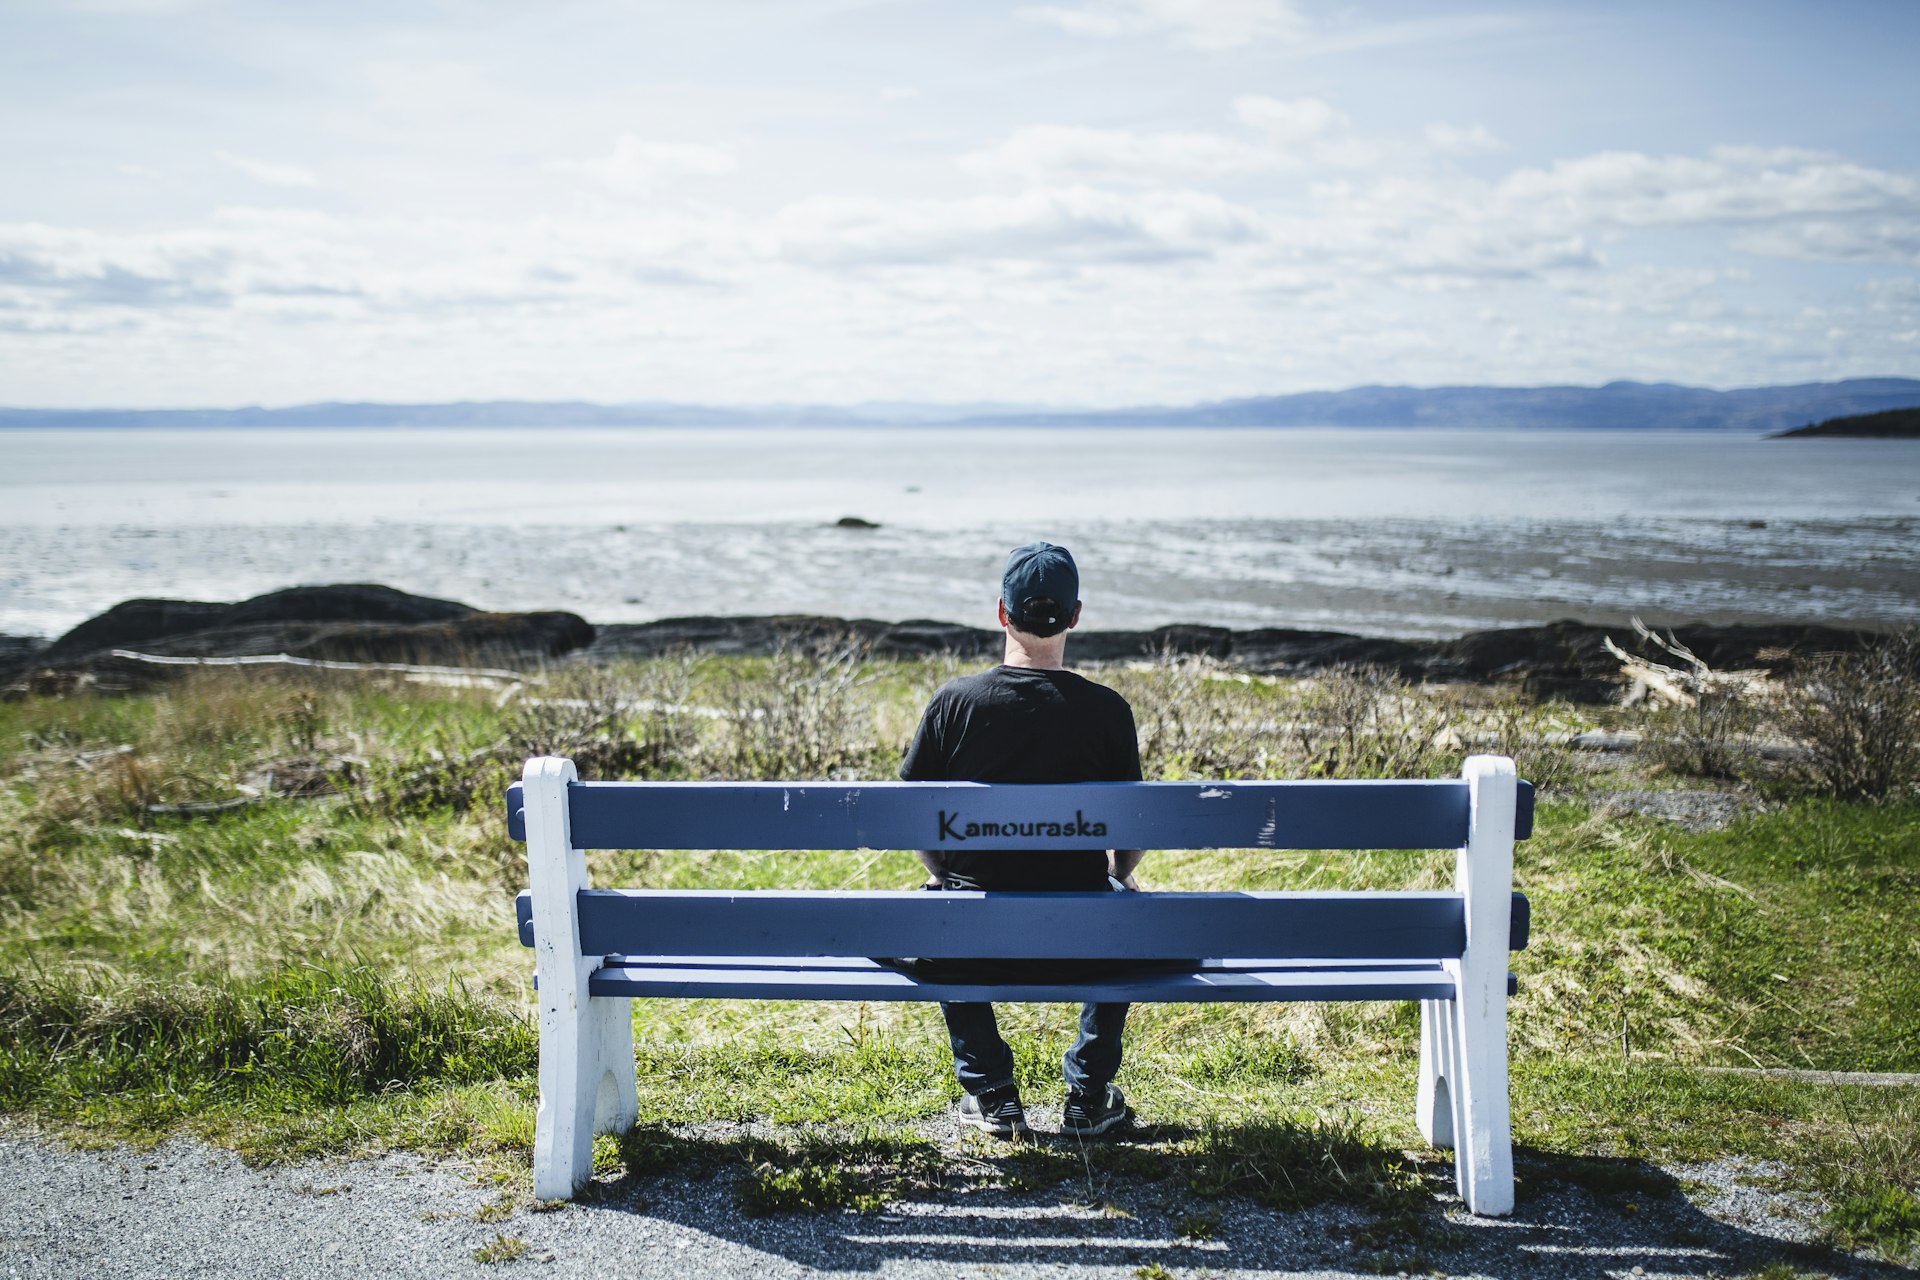 A man sitting watching the river in Kamouraska, Quebec